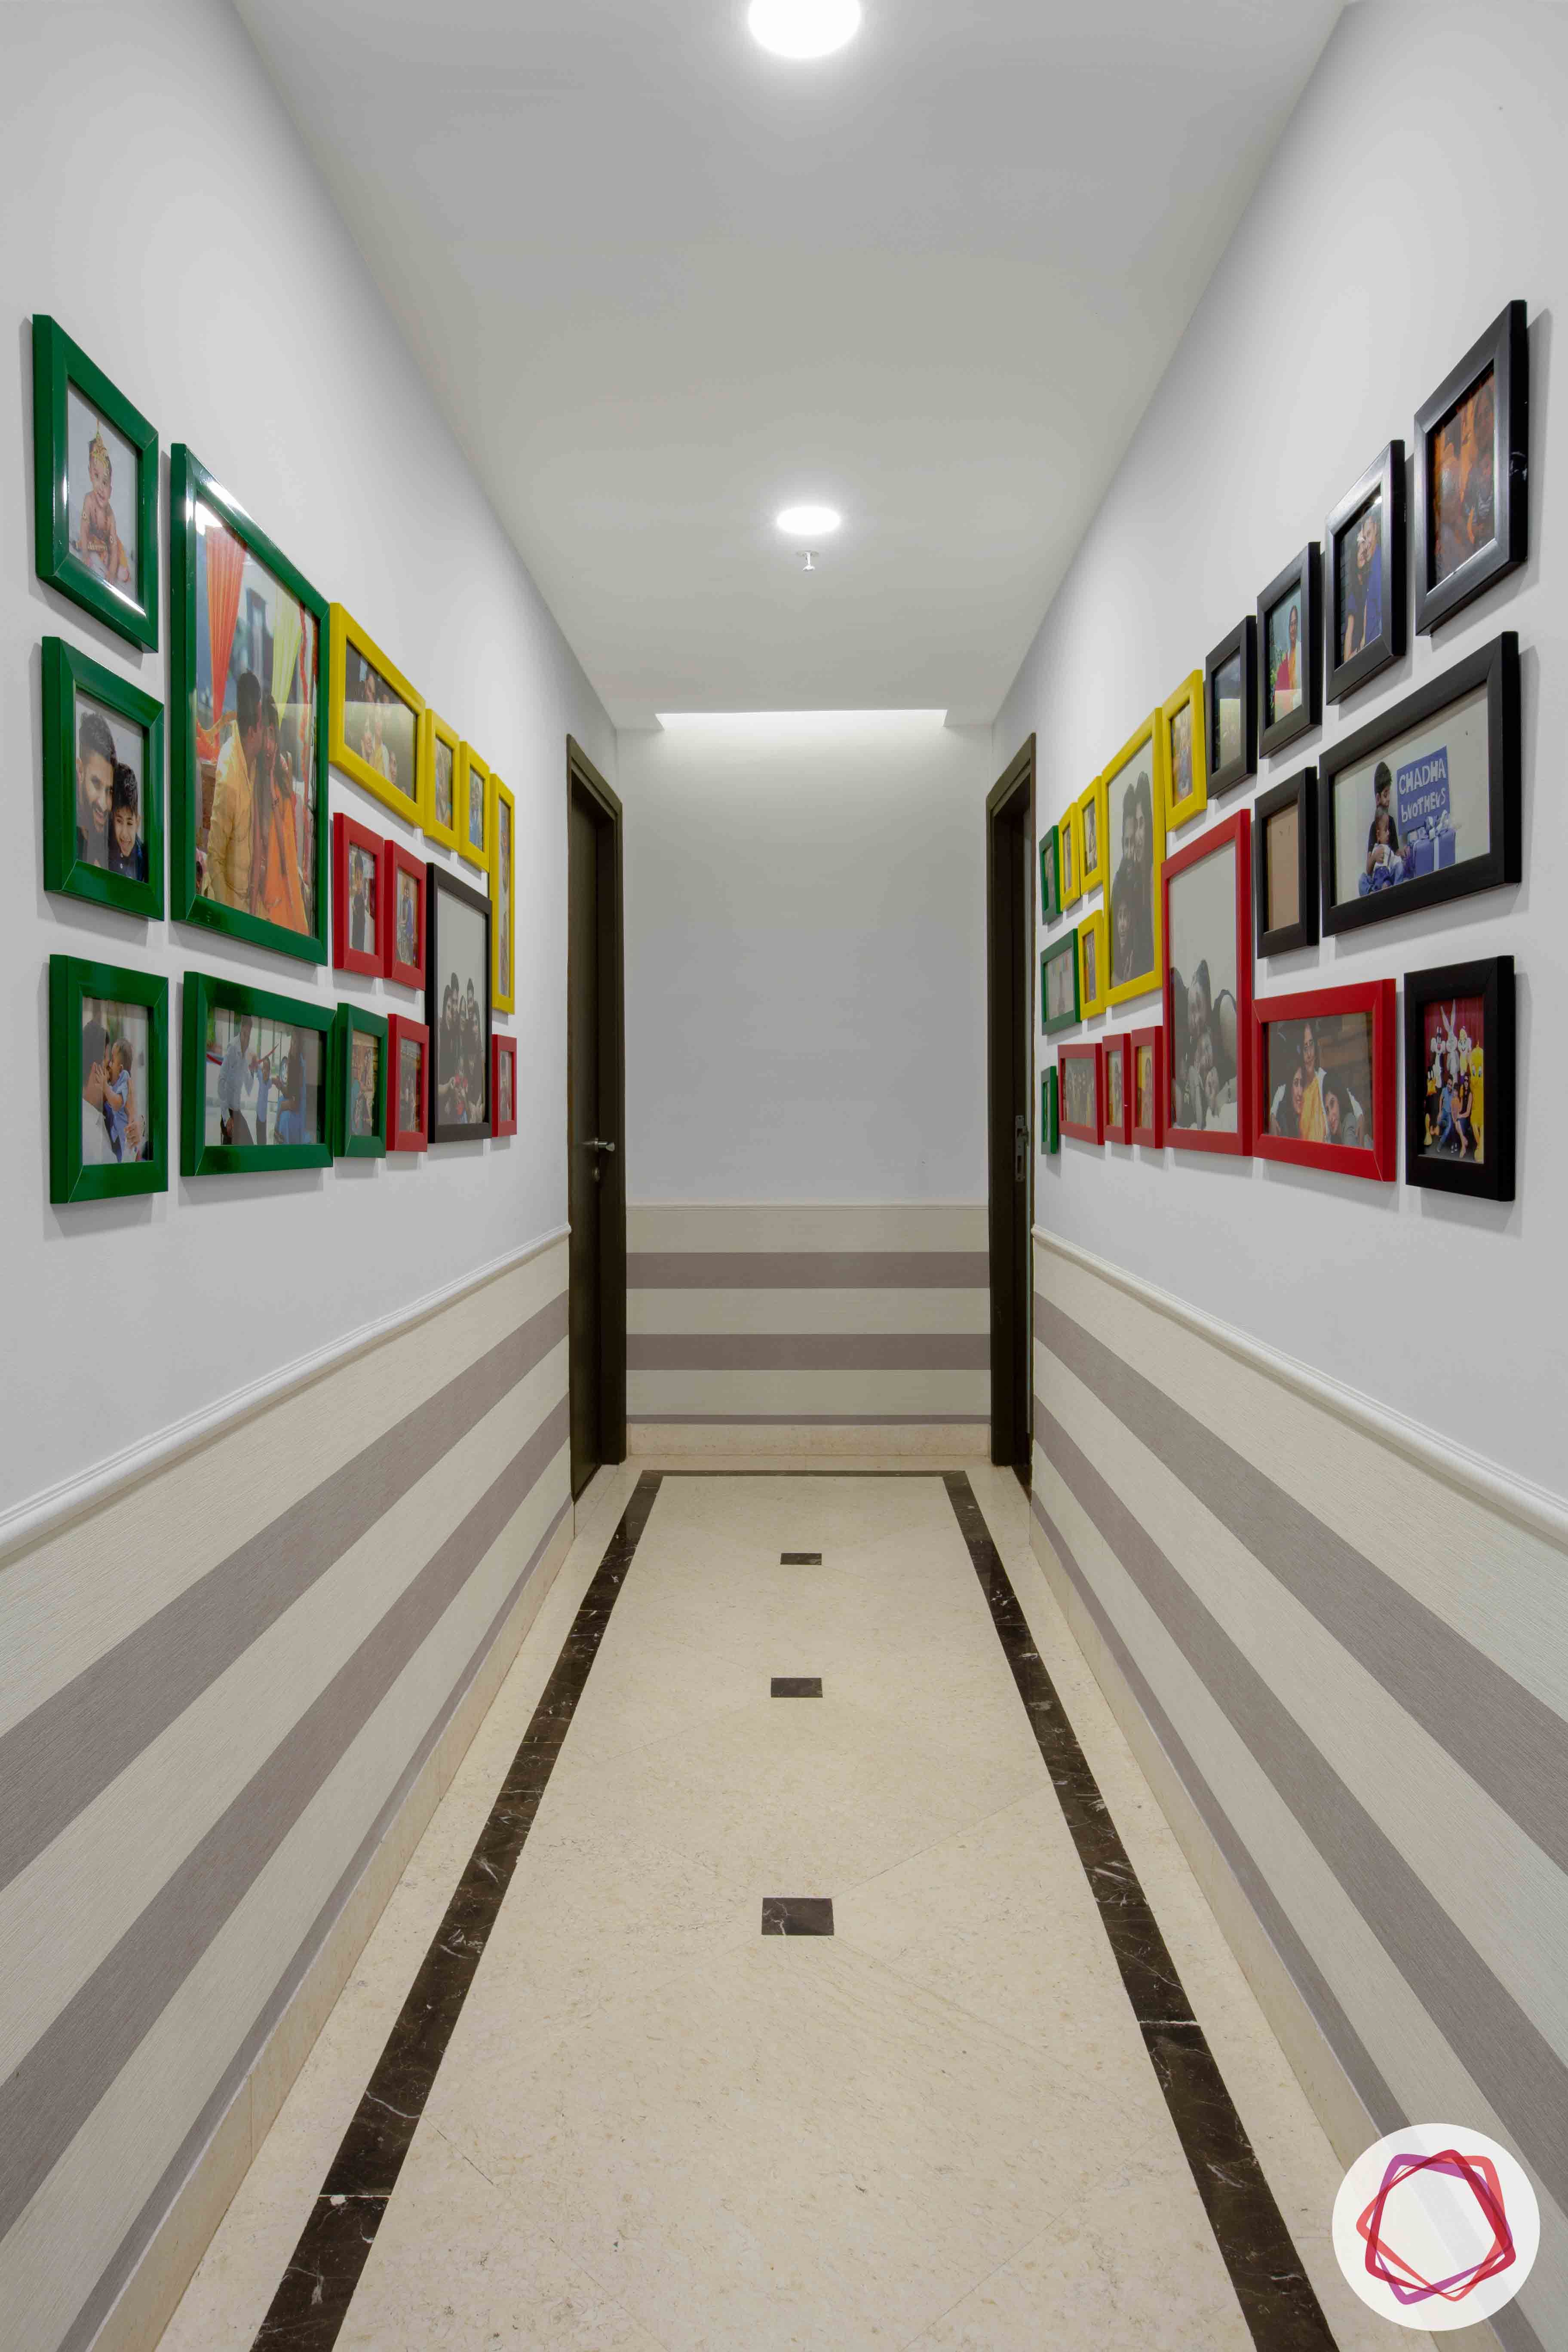 photo frame designs-gallery wall designs
